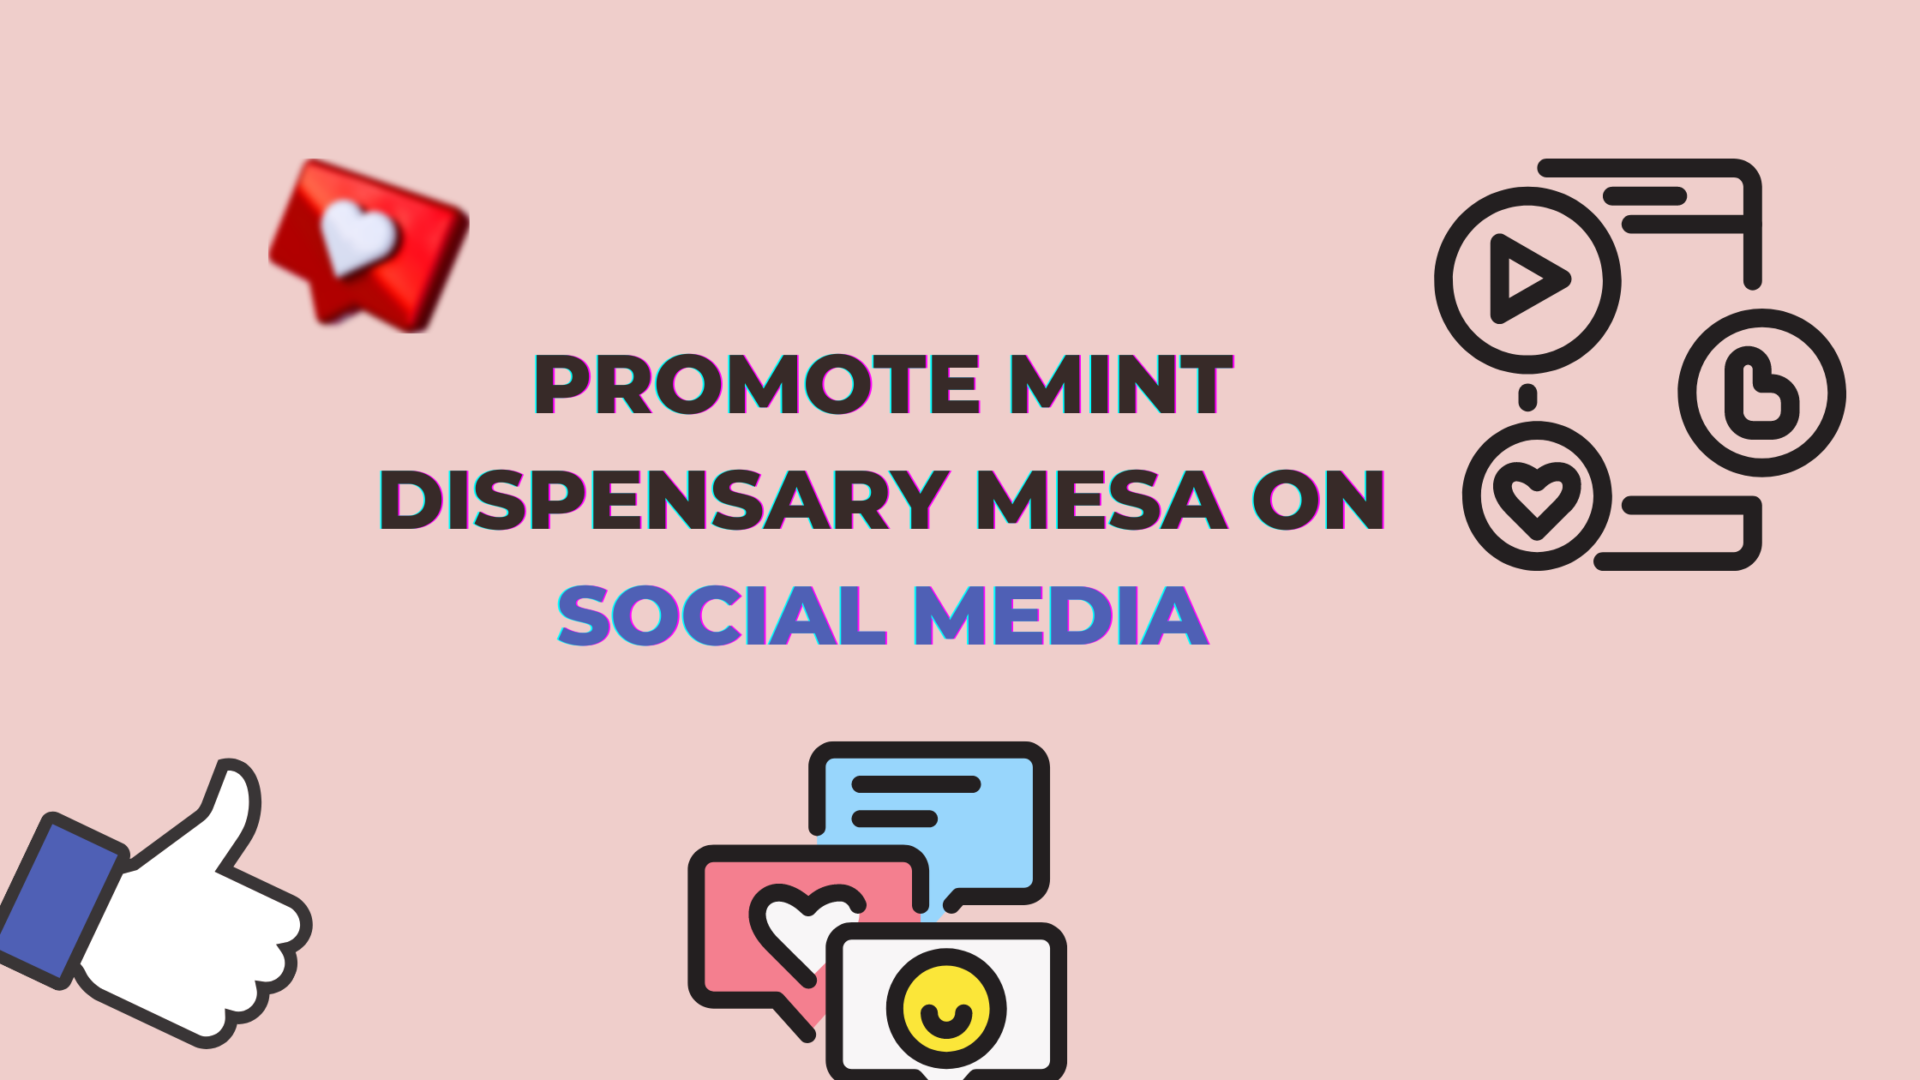 How to Promote a Mint Dispensary on Social Media?